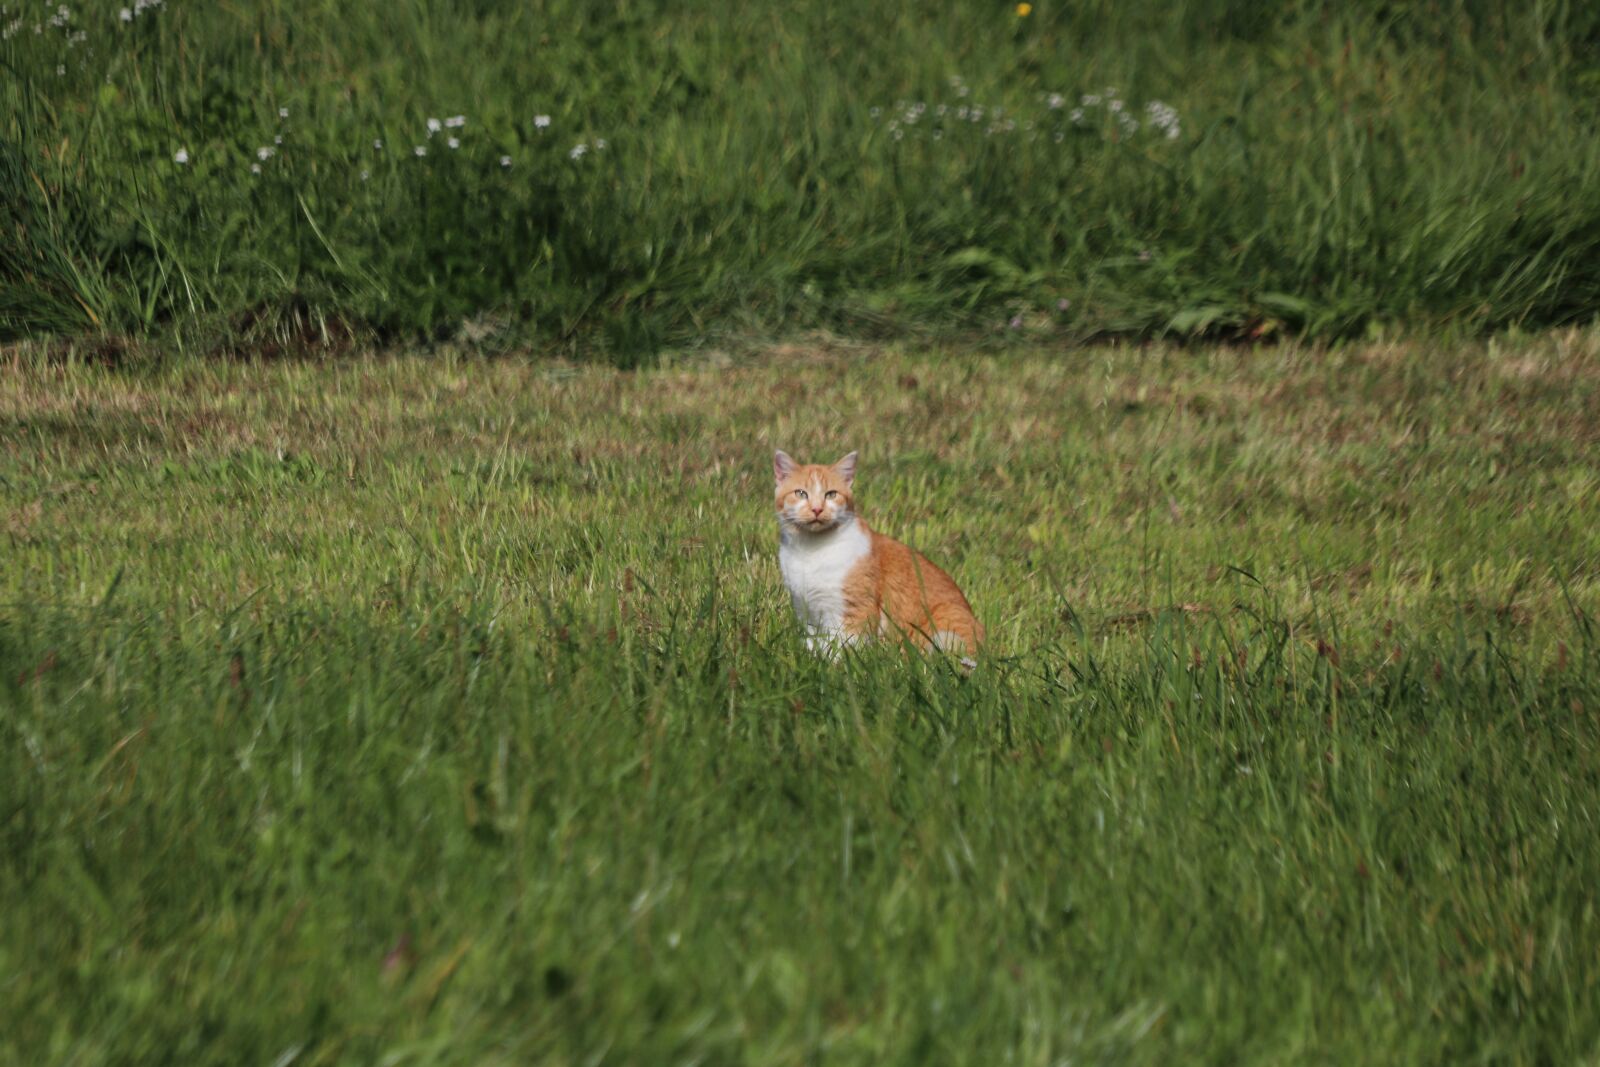 18-300mm F3.5-6.3 DC MACRO OS HSM | Contemporary 014 sample photo. Cat, field, grass photography